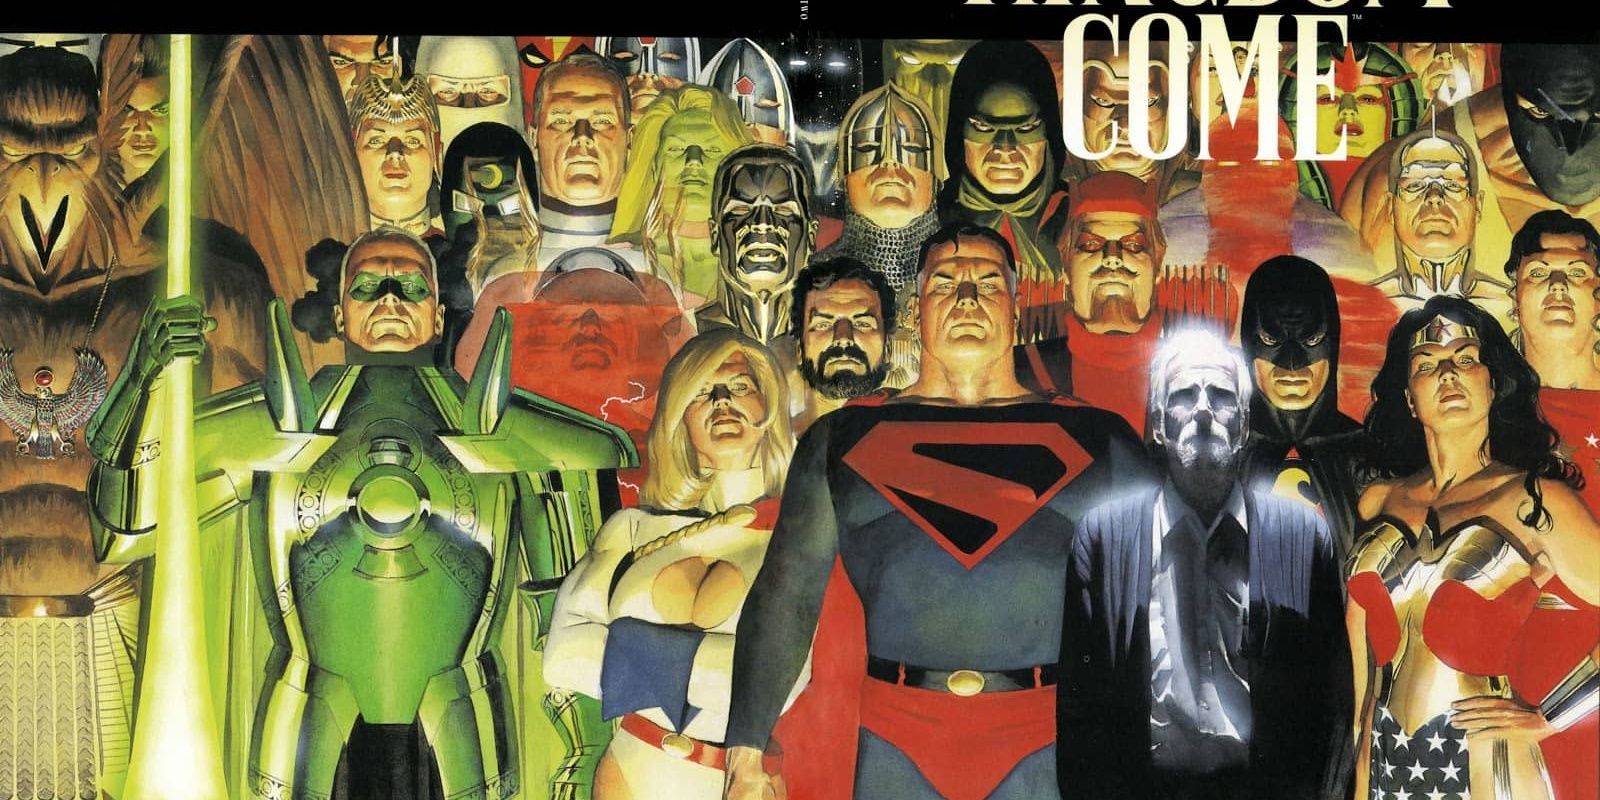 Cover for Kingdom Come by Alex Ross